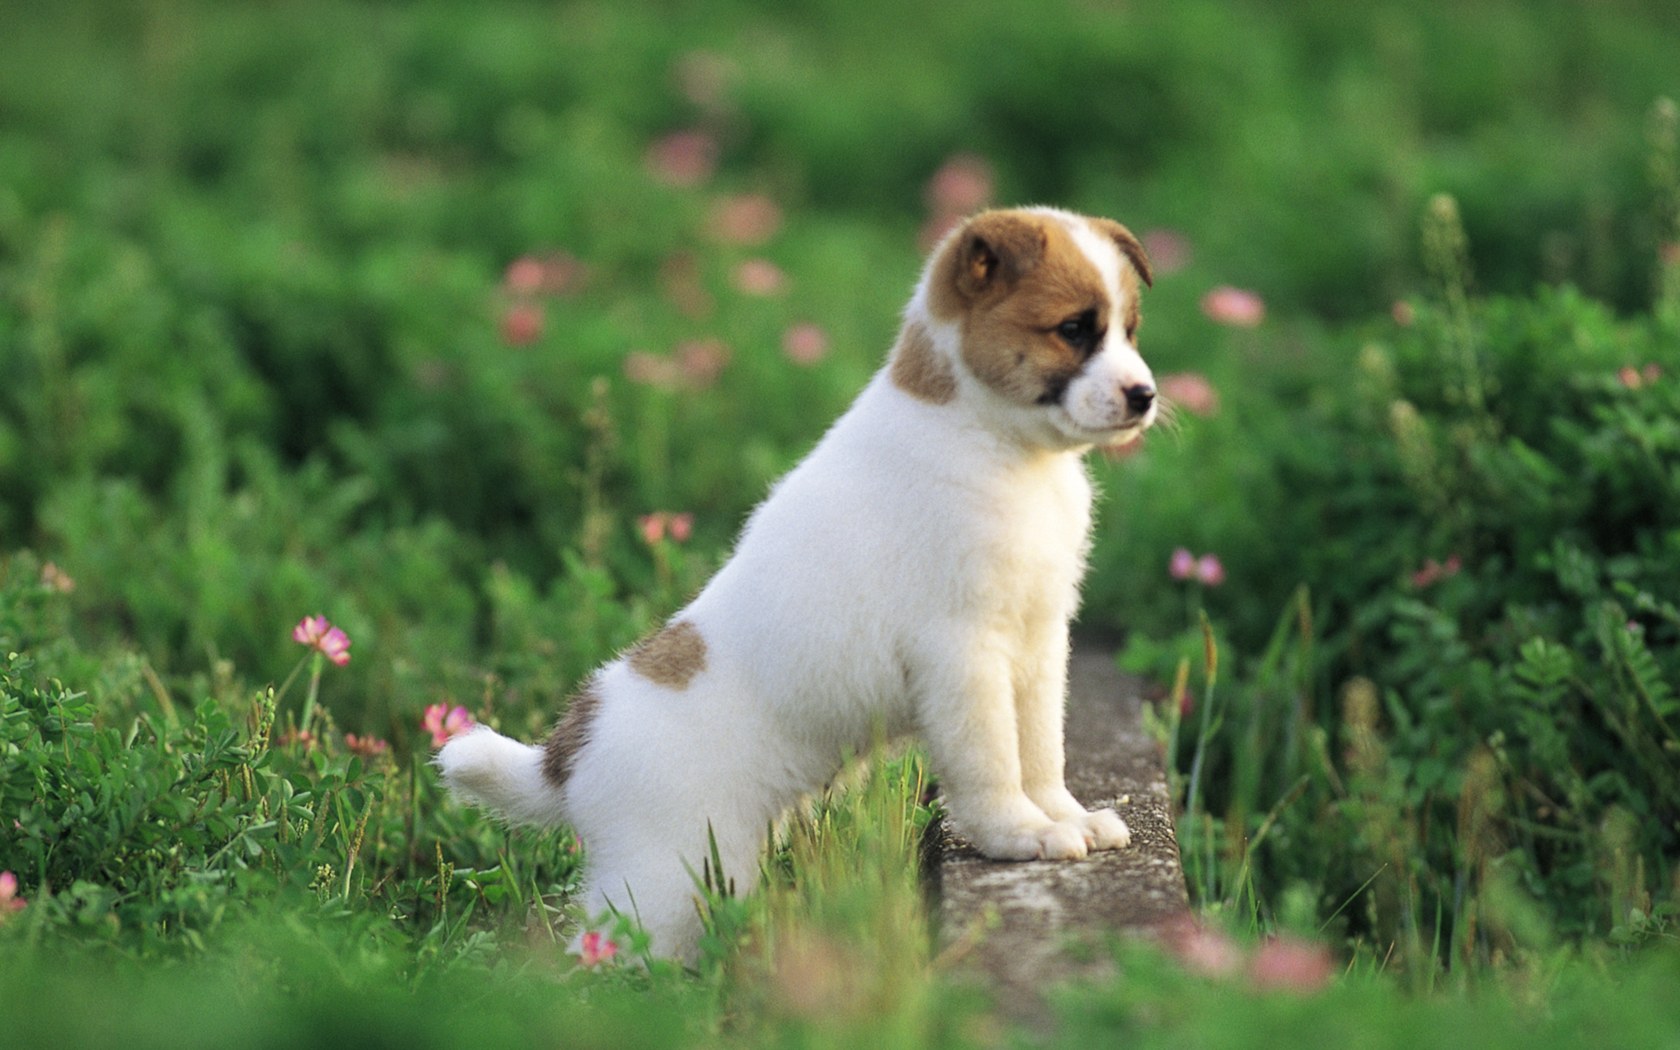 Cute puppy in a park, puppy dog on grass, Lovely puppies outdoor ...